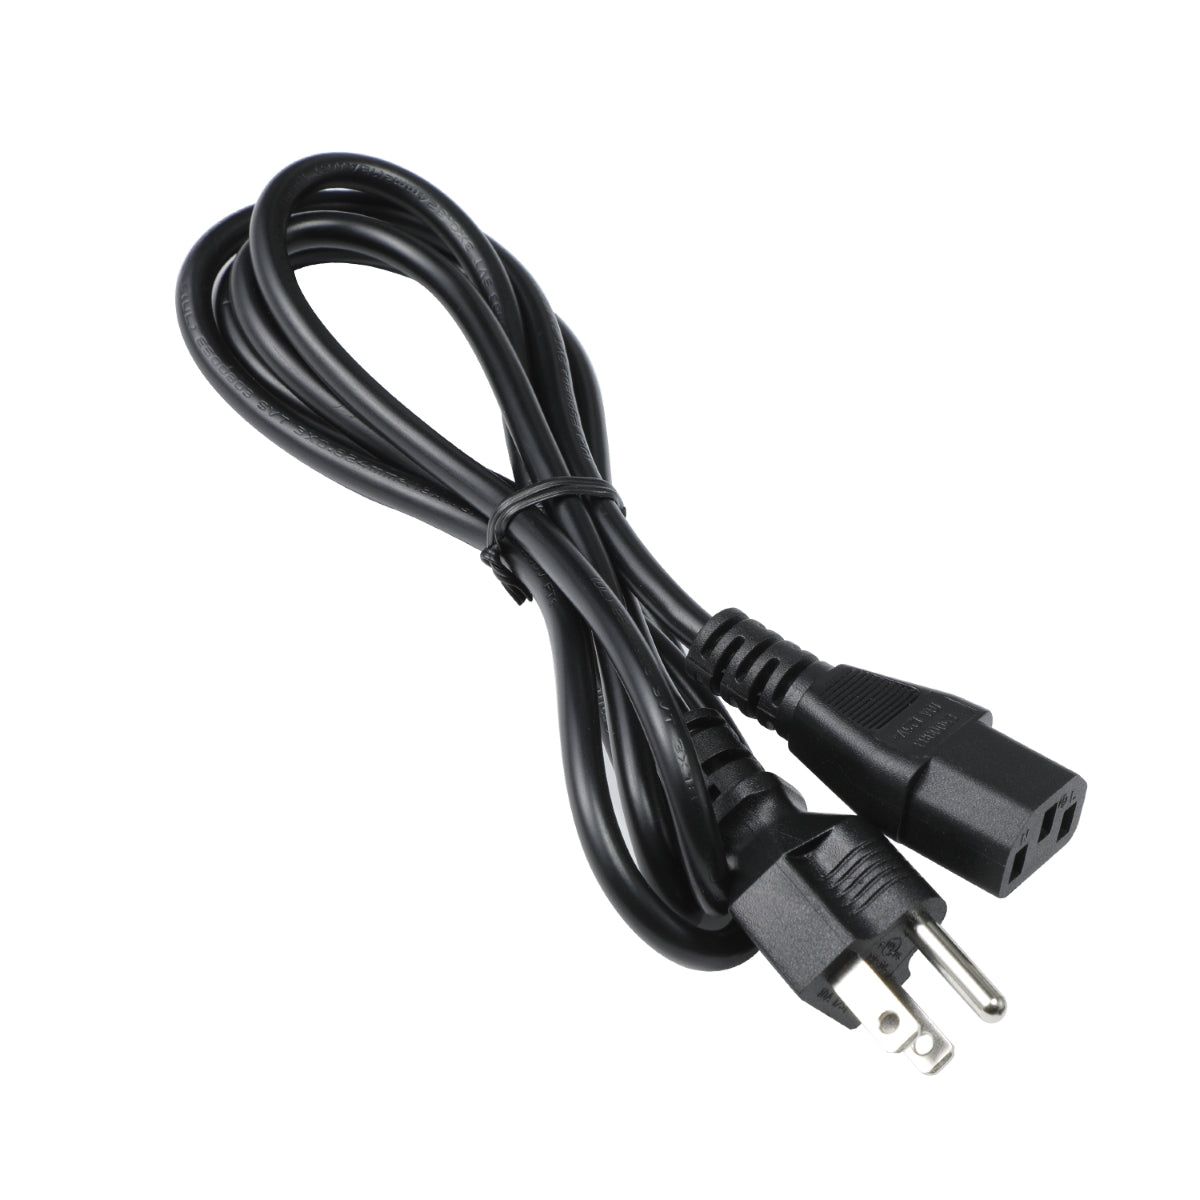 Acer VG271 Pbmiipx Monitor Power Cable